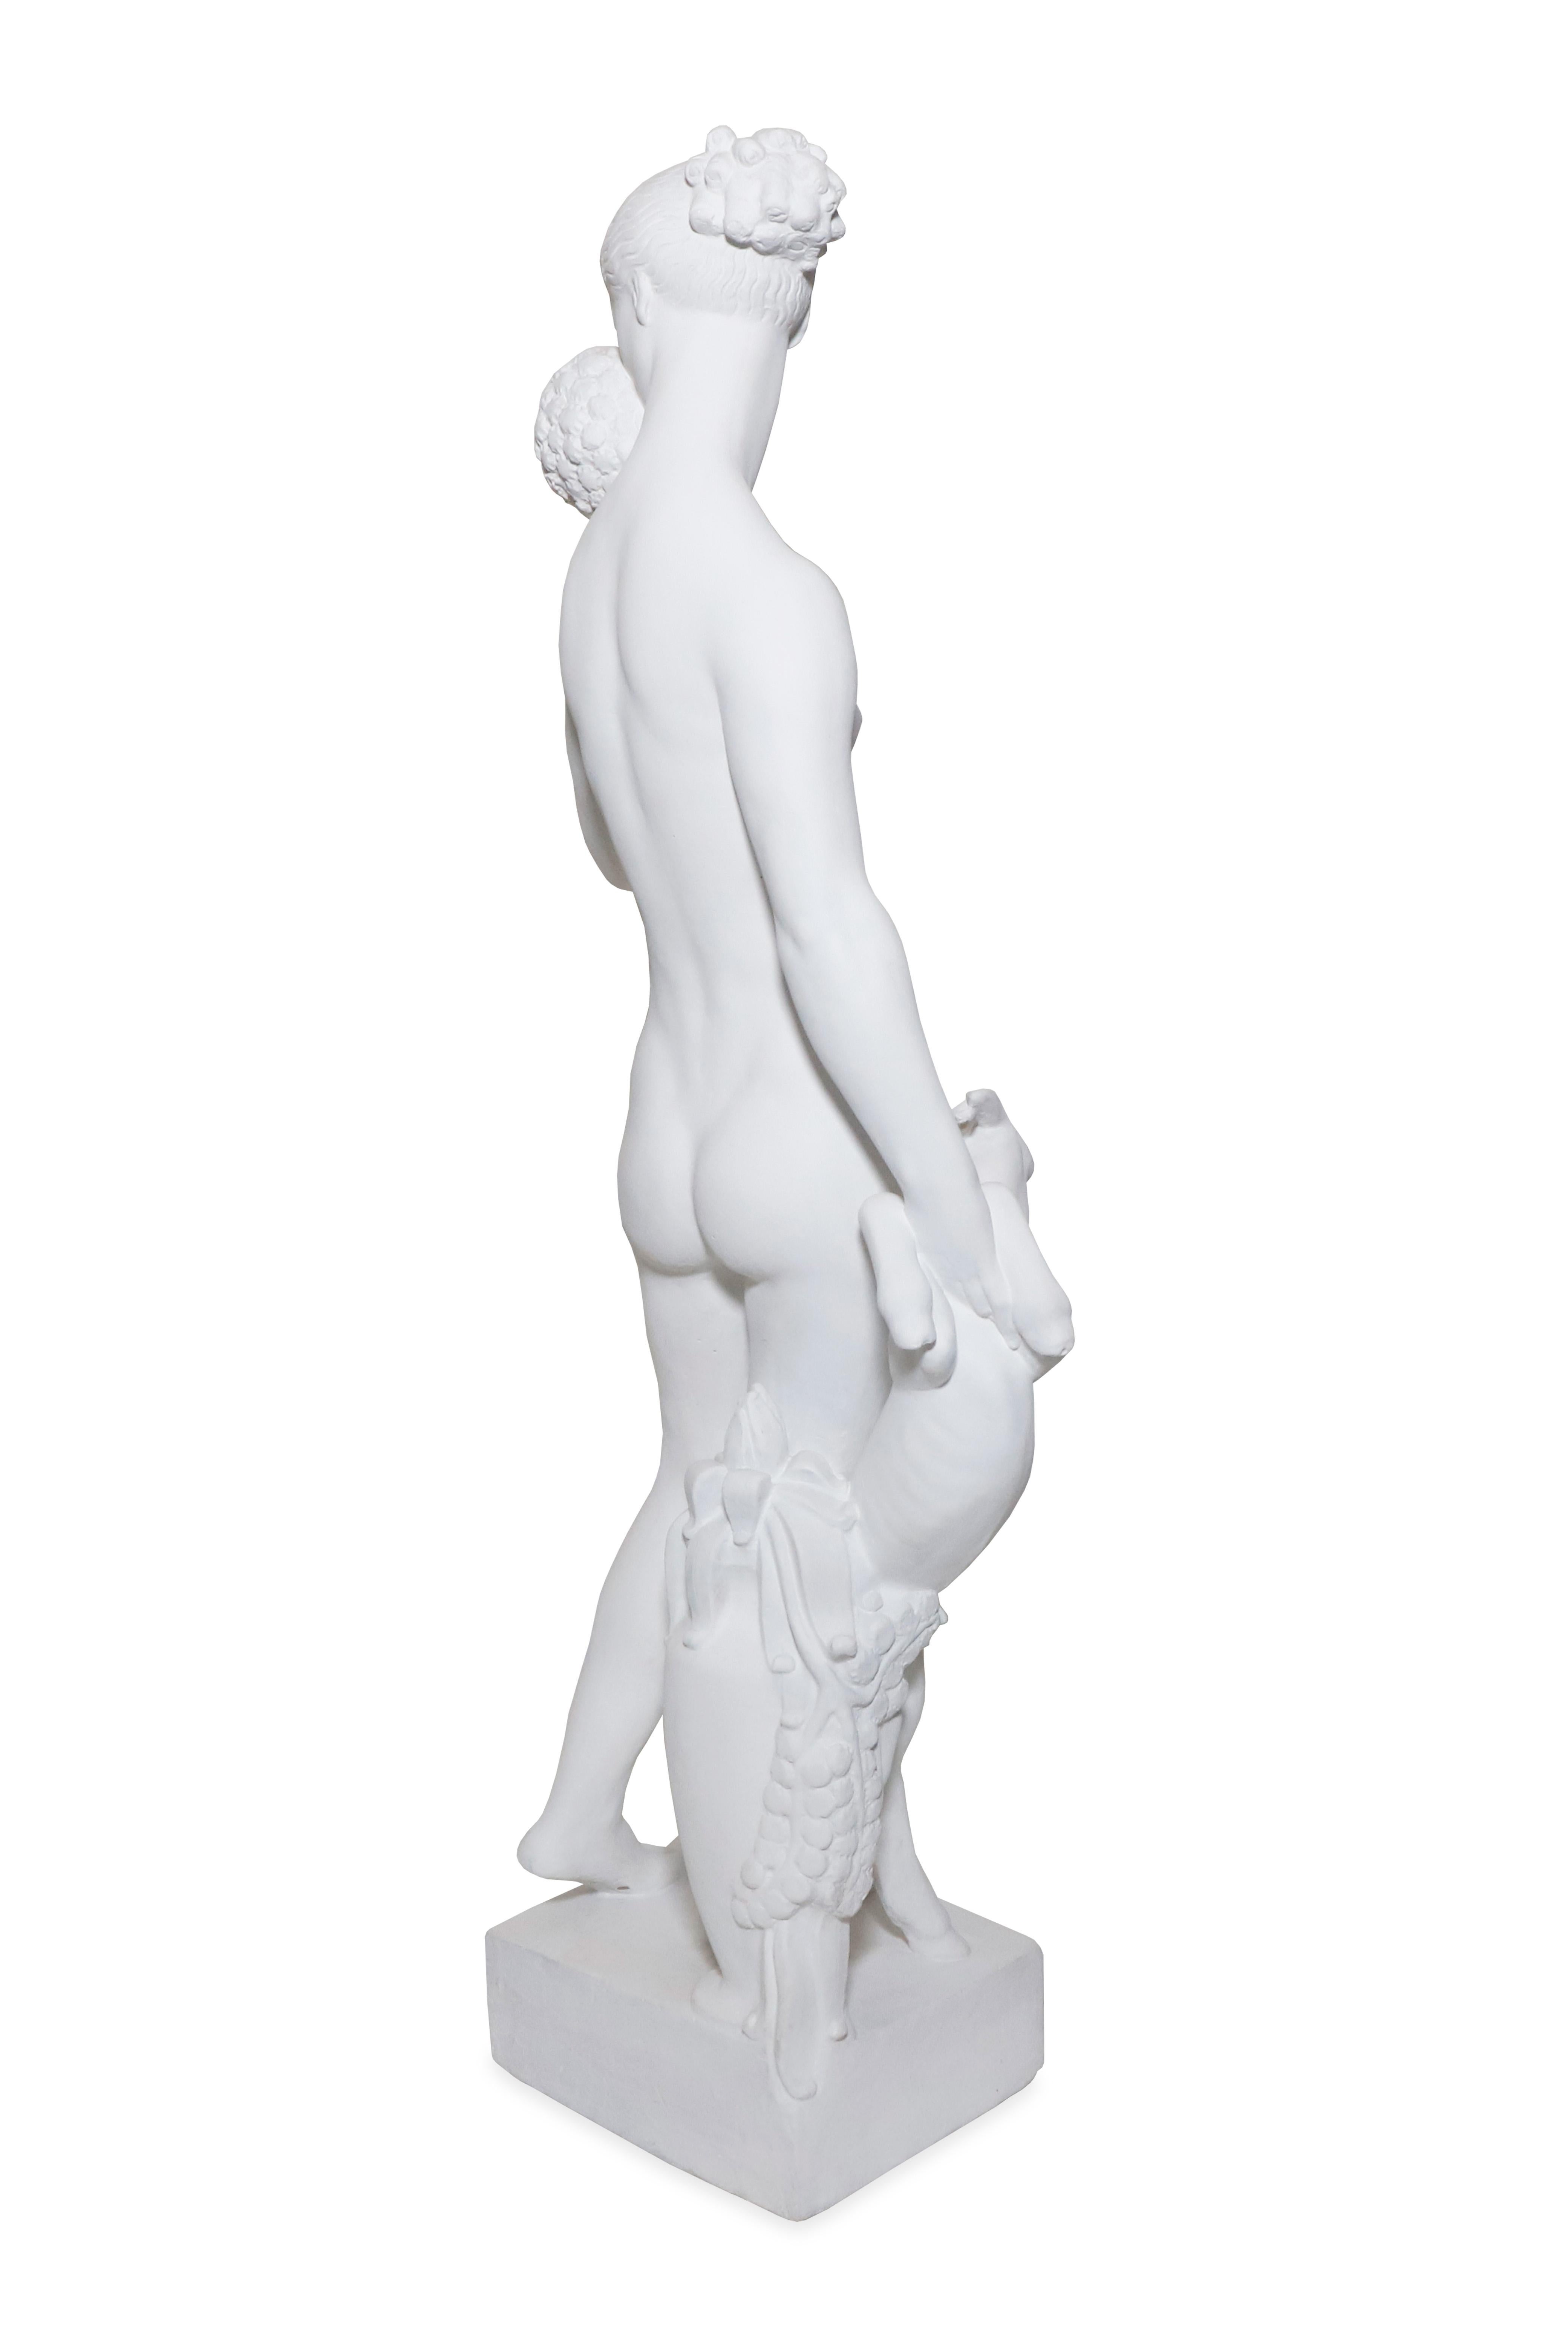 1920s Carl Milles Plaster Sculpture of a Women In Good Condition For Sale In New York, NY